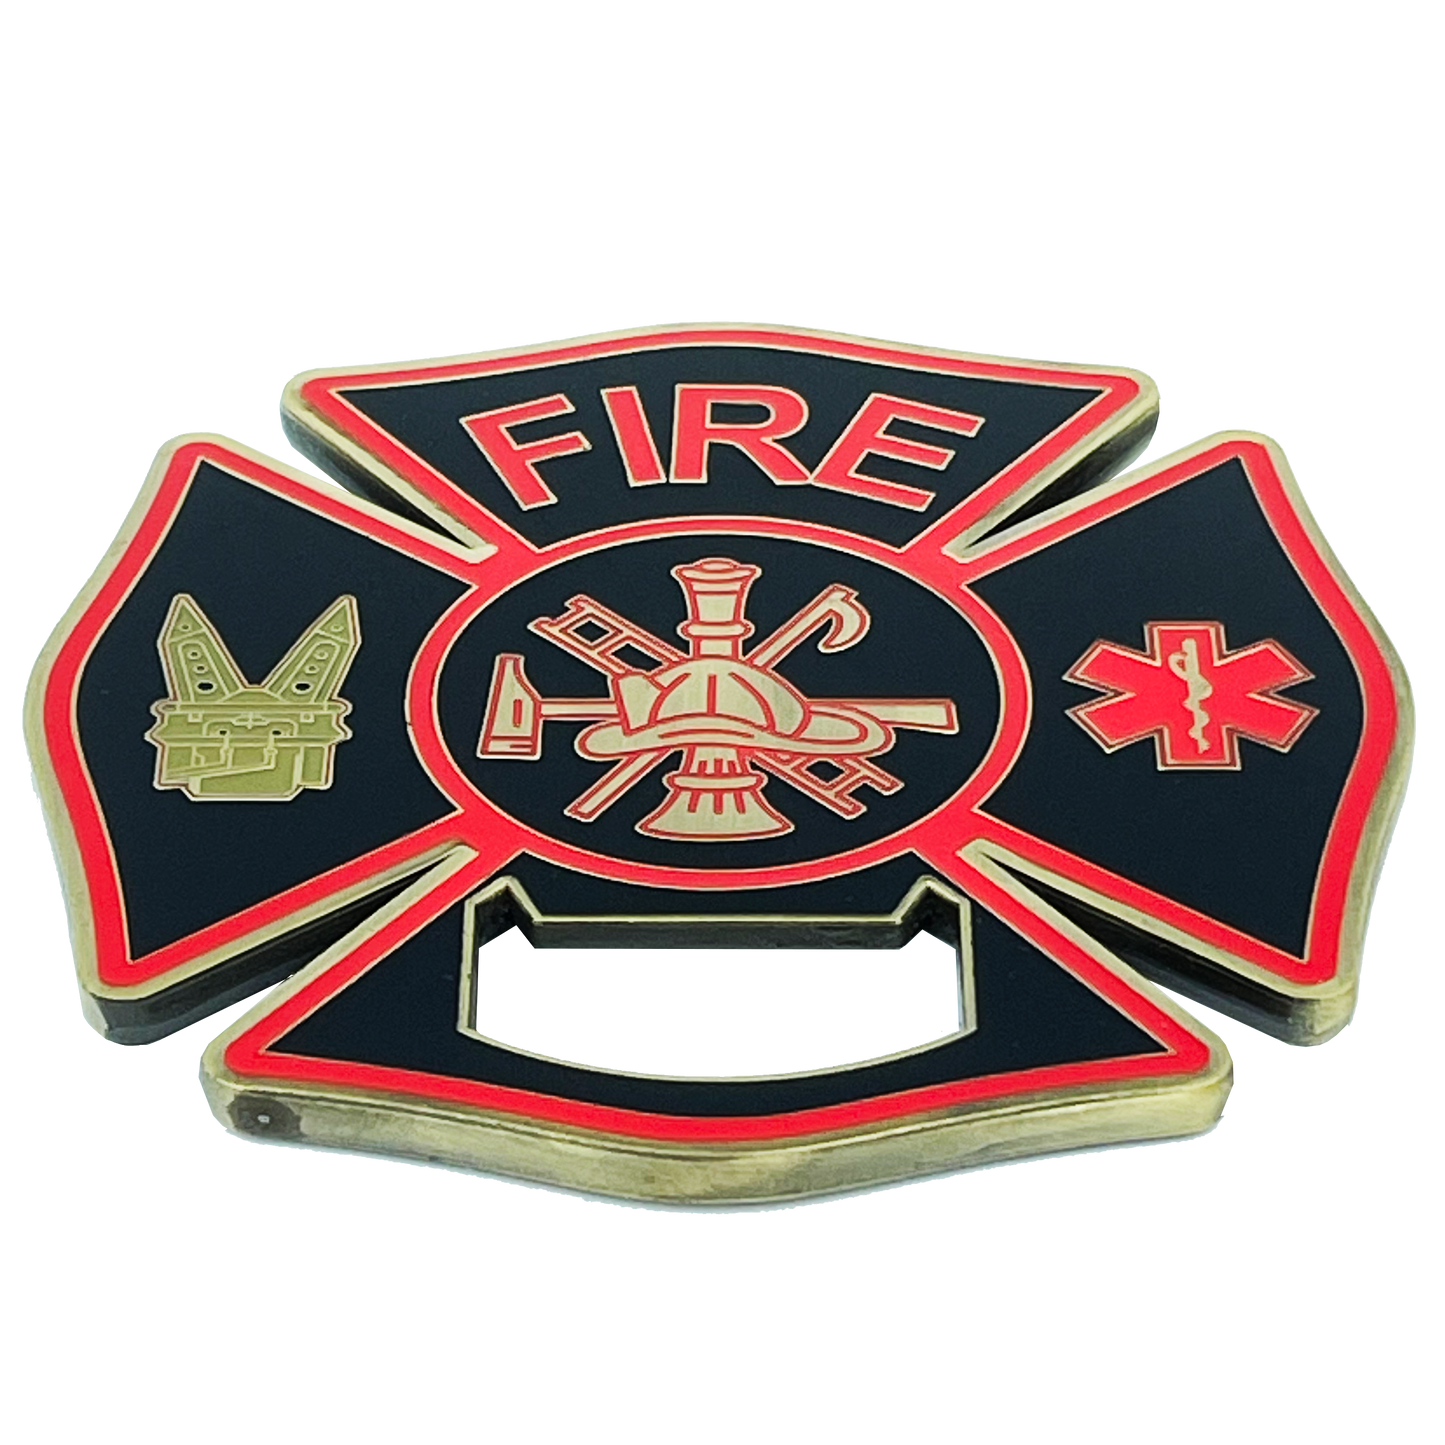 BL2-005A Large Fire Department Firefighter thin red line maltese cross EMT paramedic bottle opener coaster challenge coin